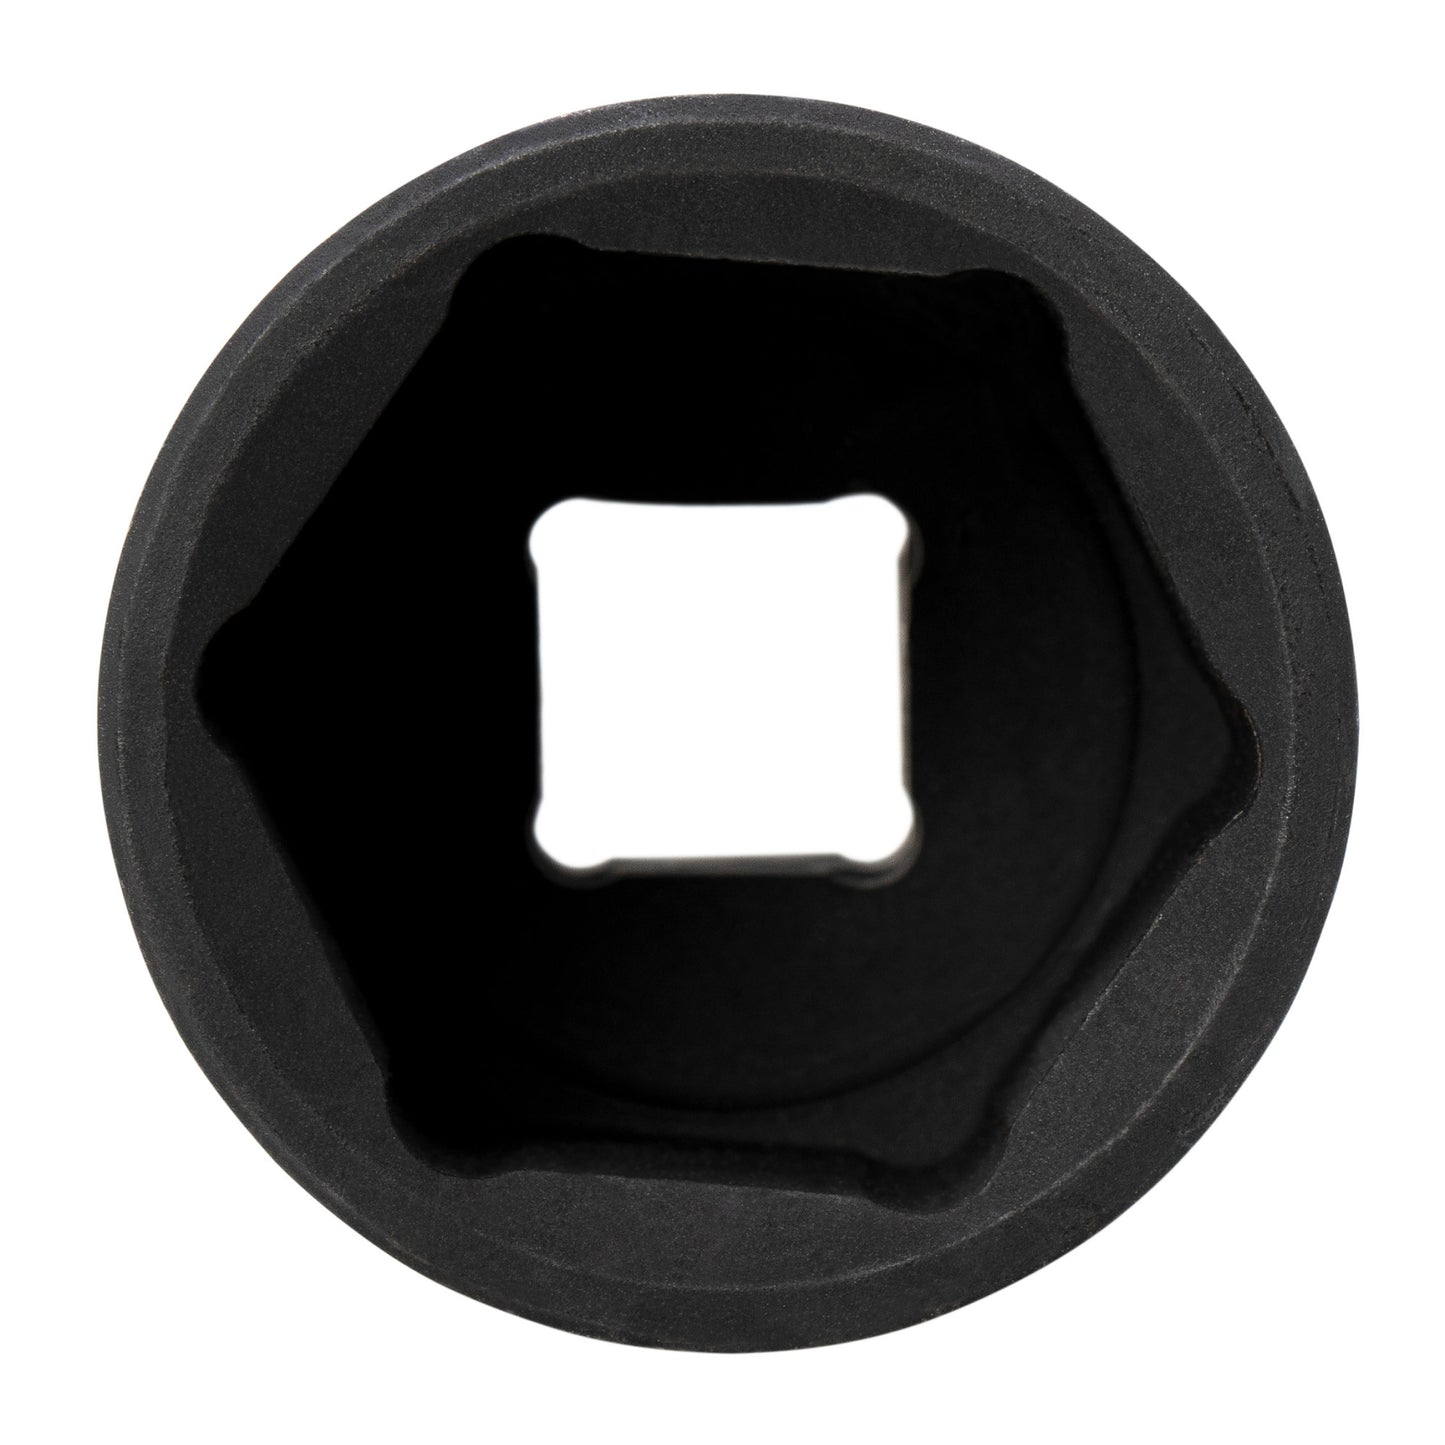 1/2-inch Drive x 1-1/4-inch Shallow 6-Point Impact SAE Socket